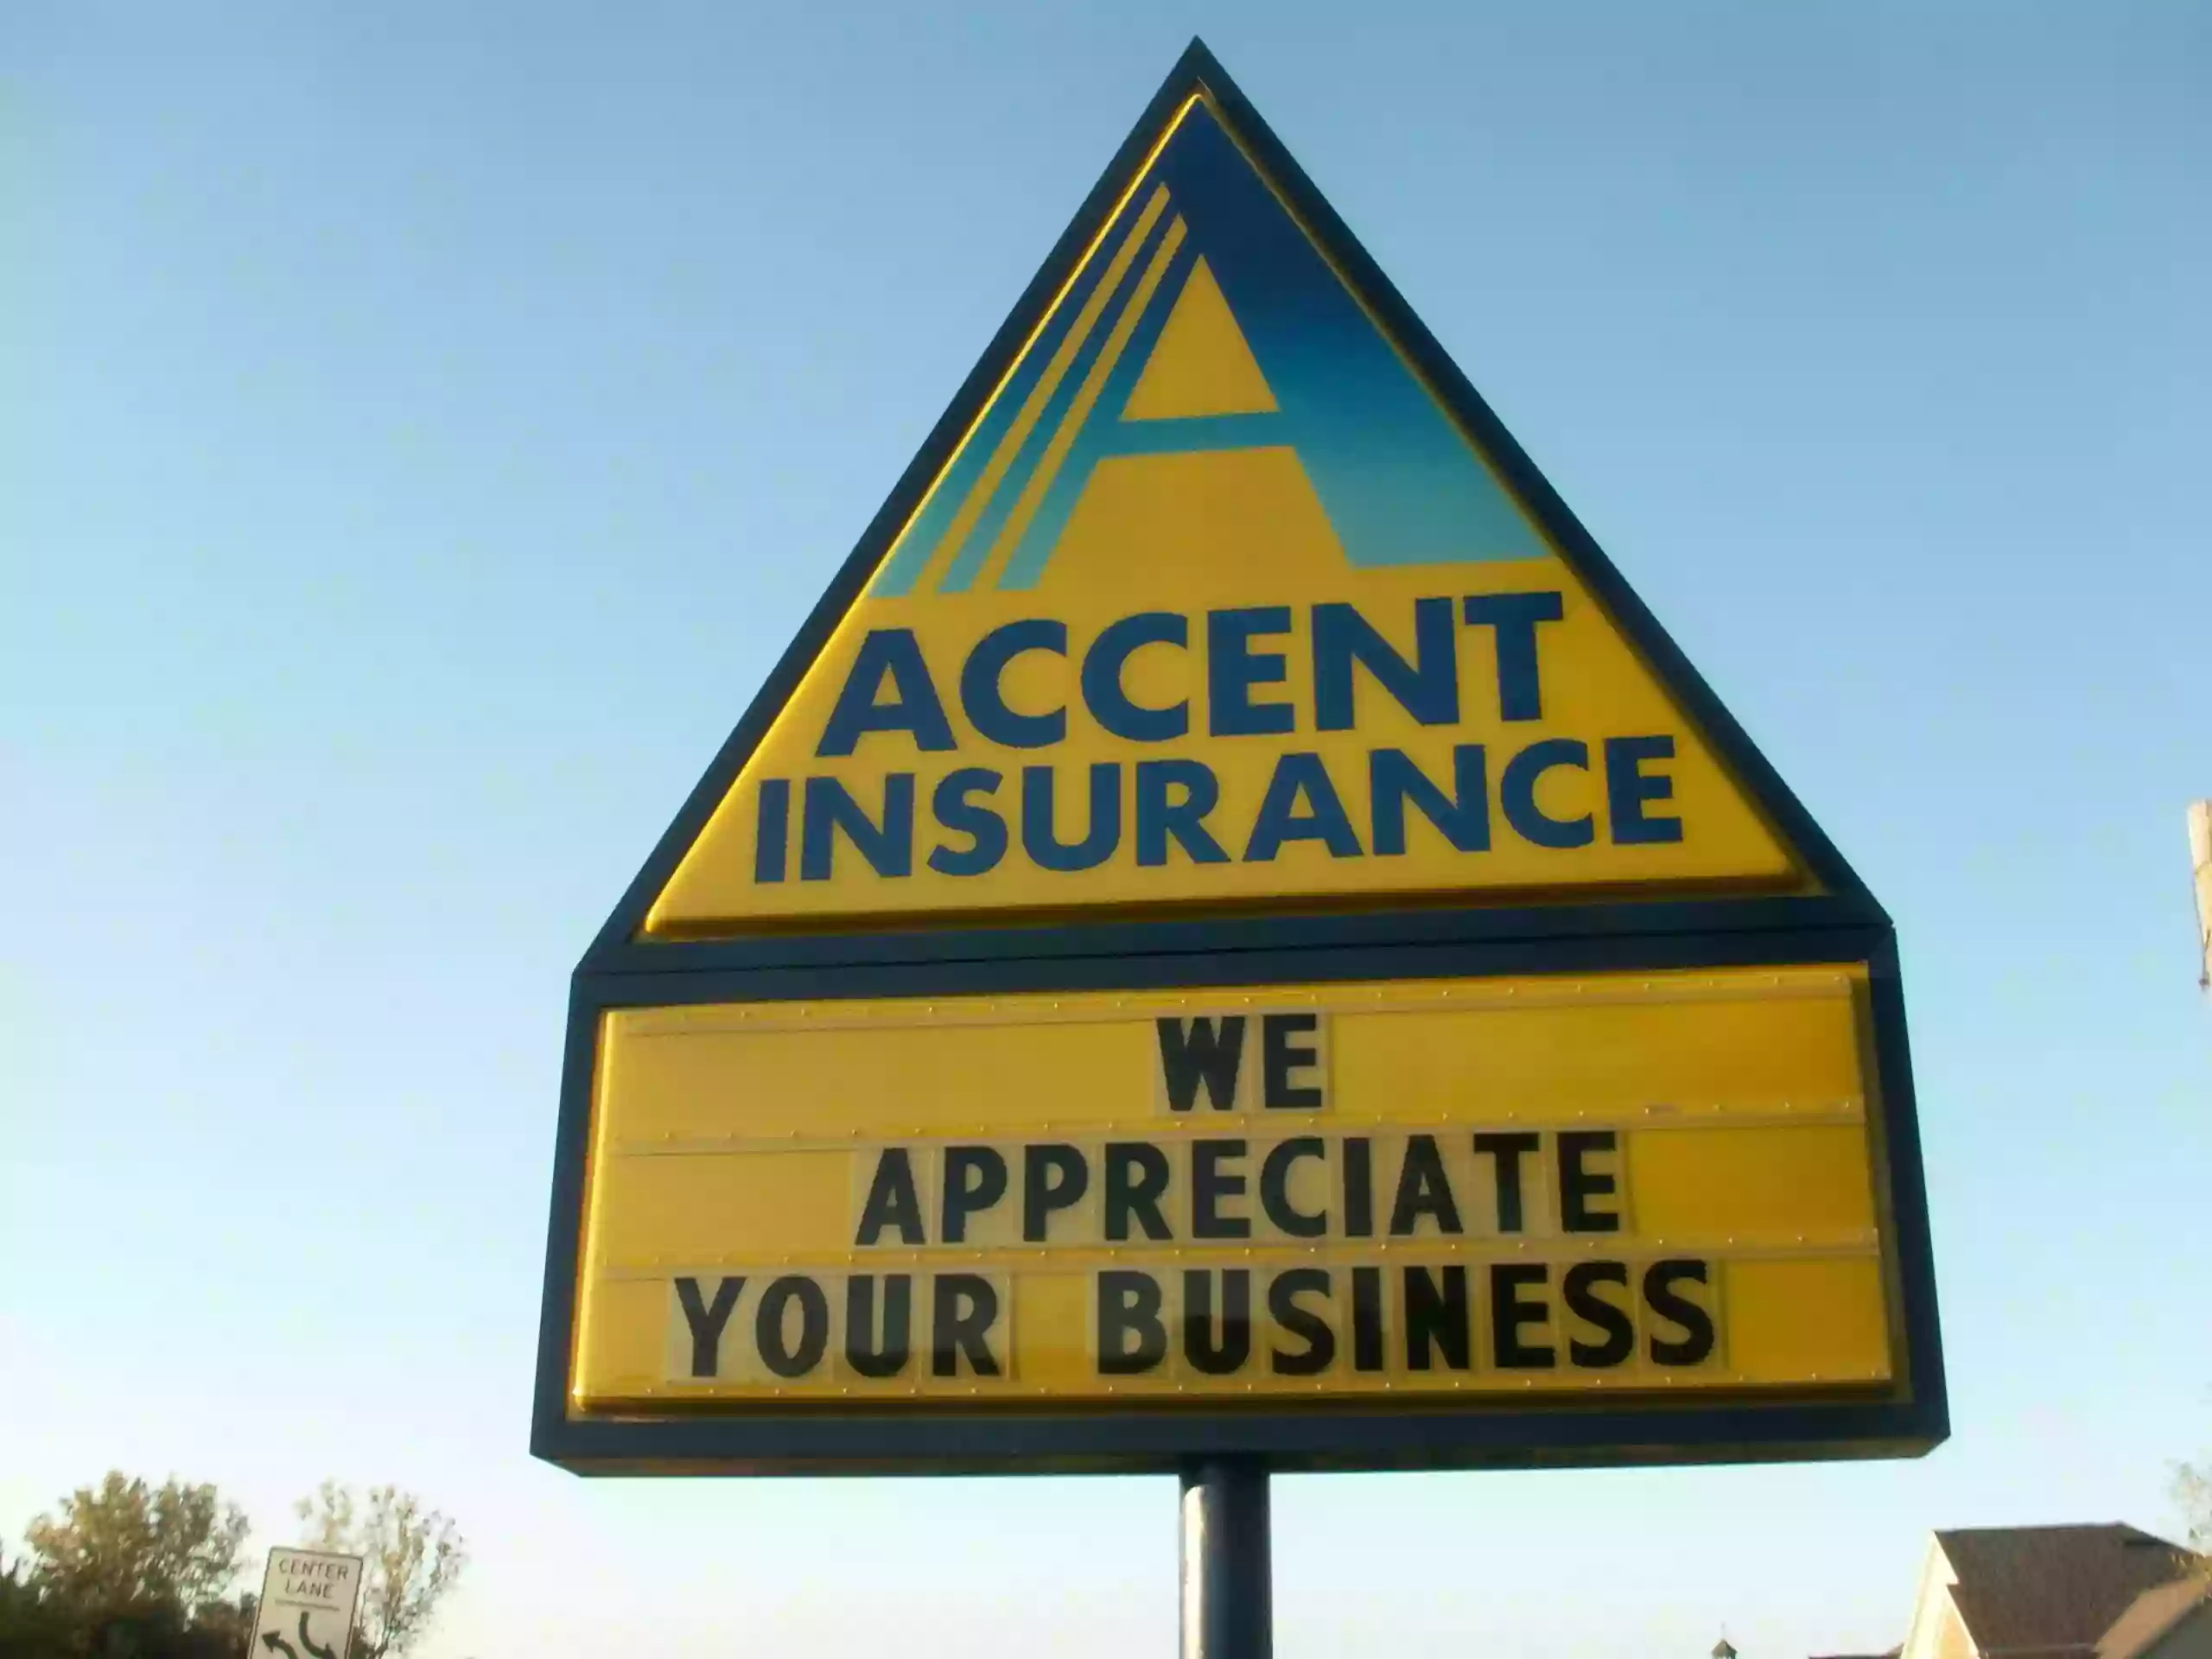 Accent Insurance Agency